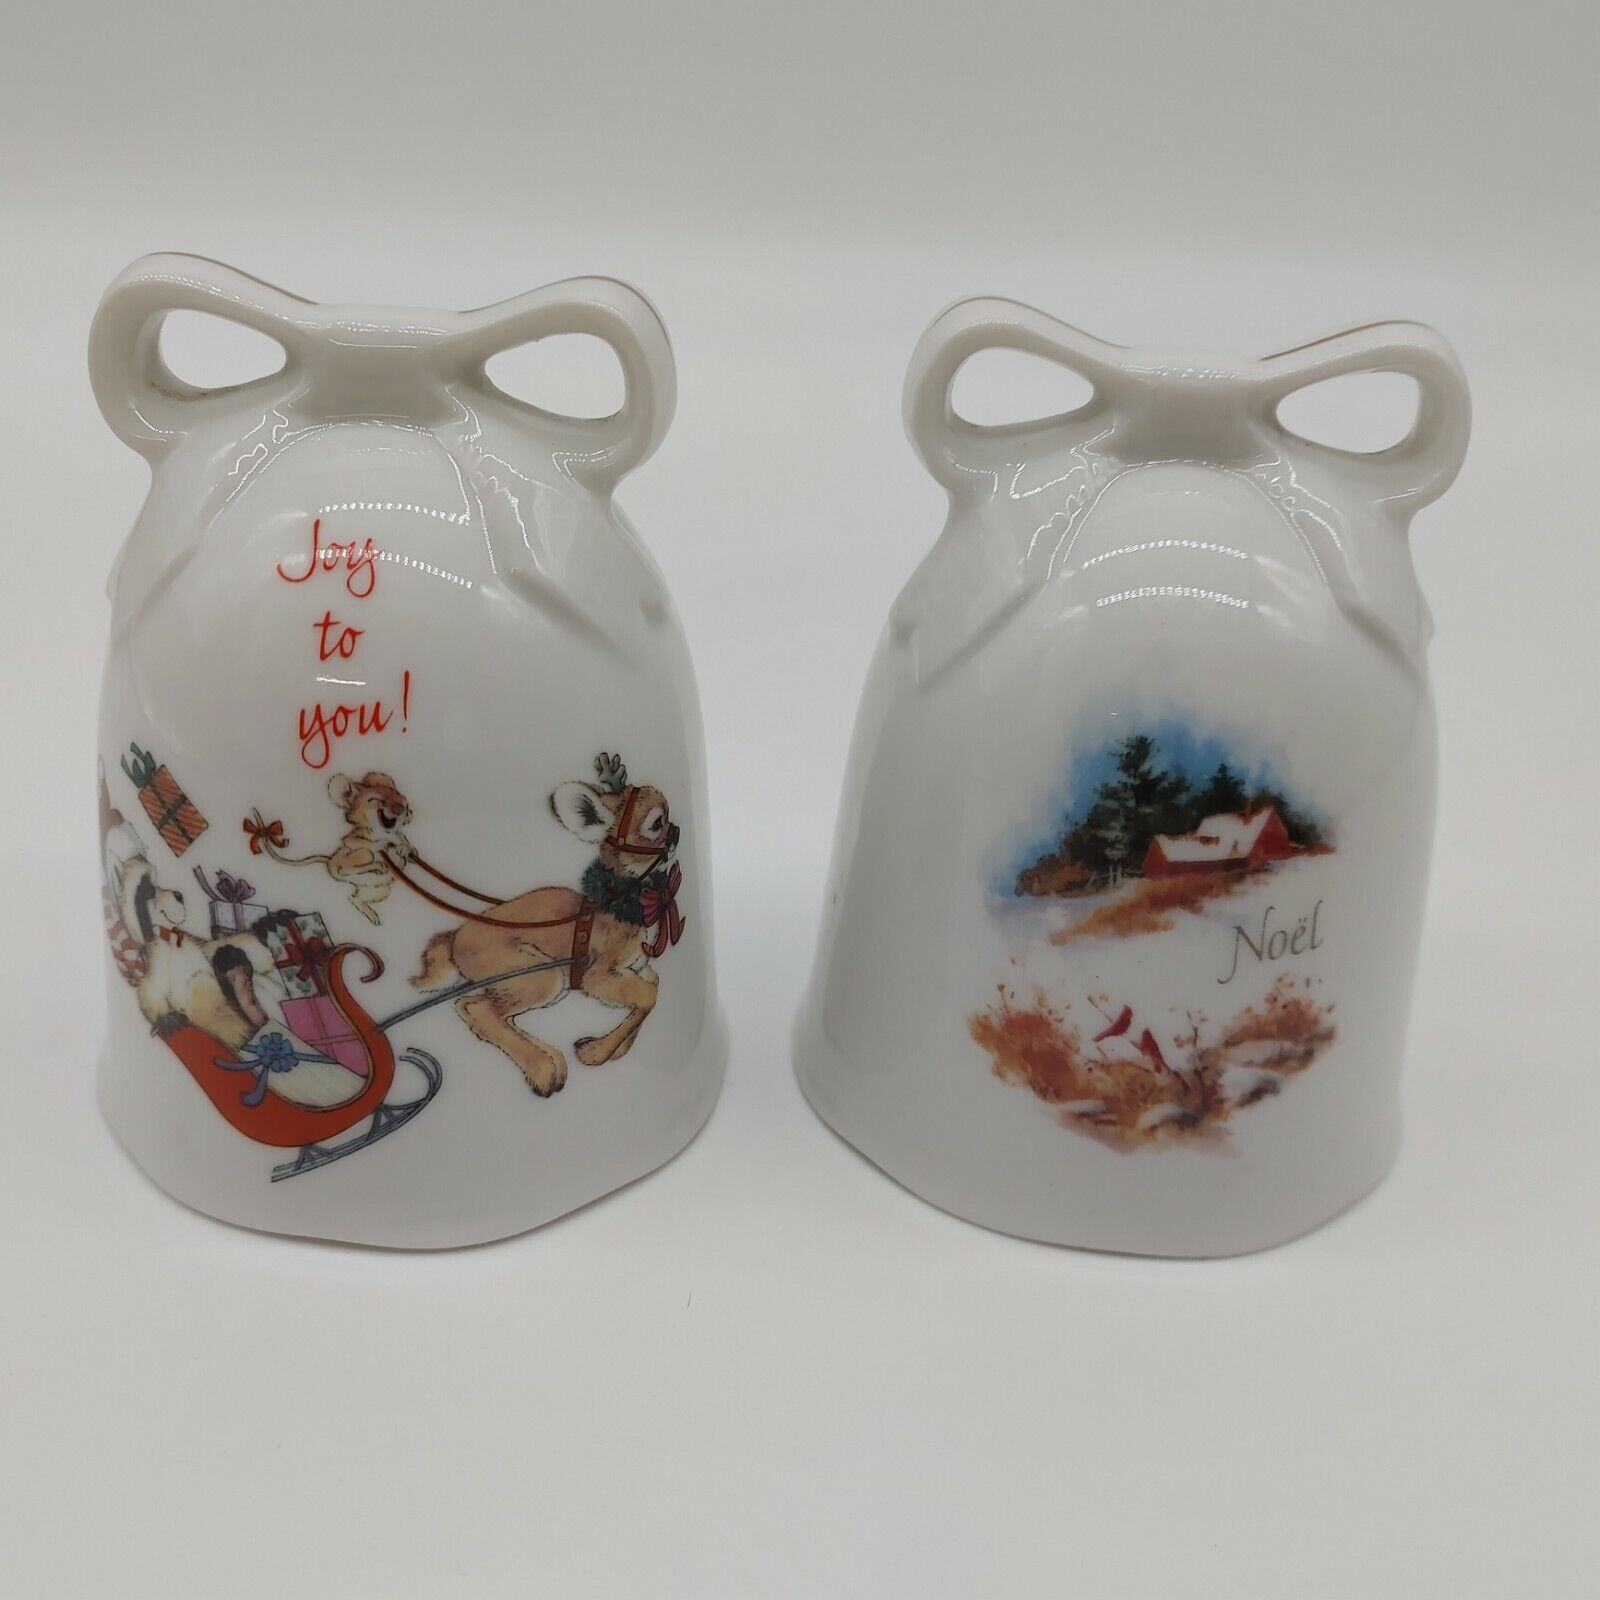 VTG Set Of 2 Designers Collection A Christmas Keepsake Joy to You And Noel Bell